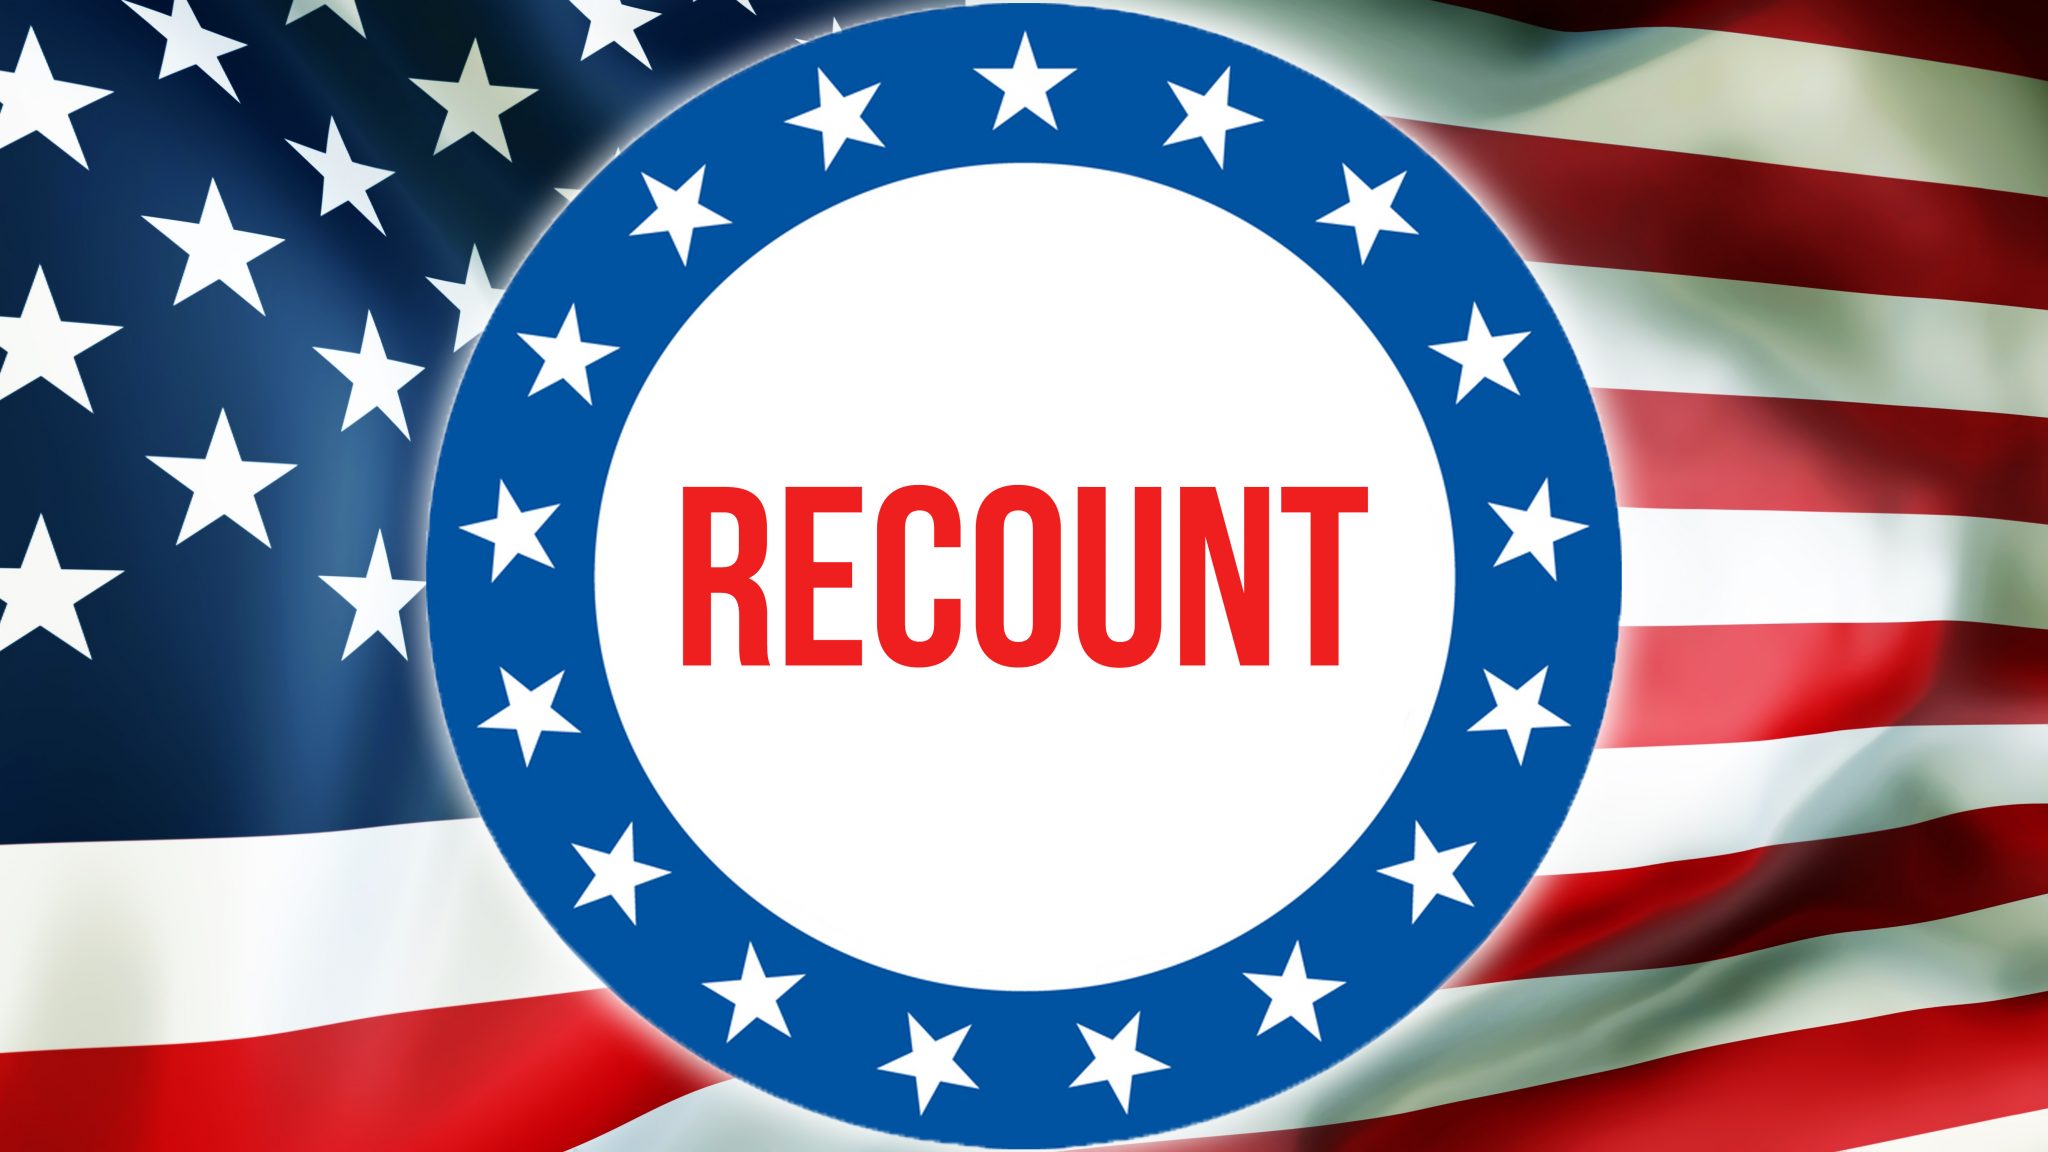 Recount election on a USA background, 3D rendering. United States of America flag waving in the wind. Voting, Freedom Democracy, Recount concept. US Presidential election banner backgroun